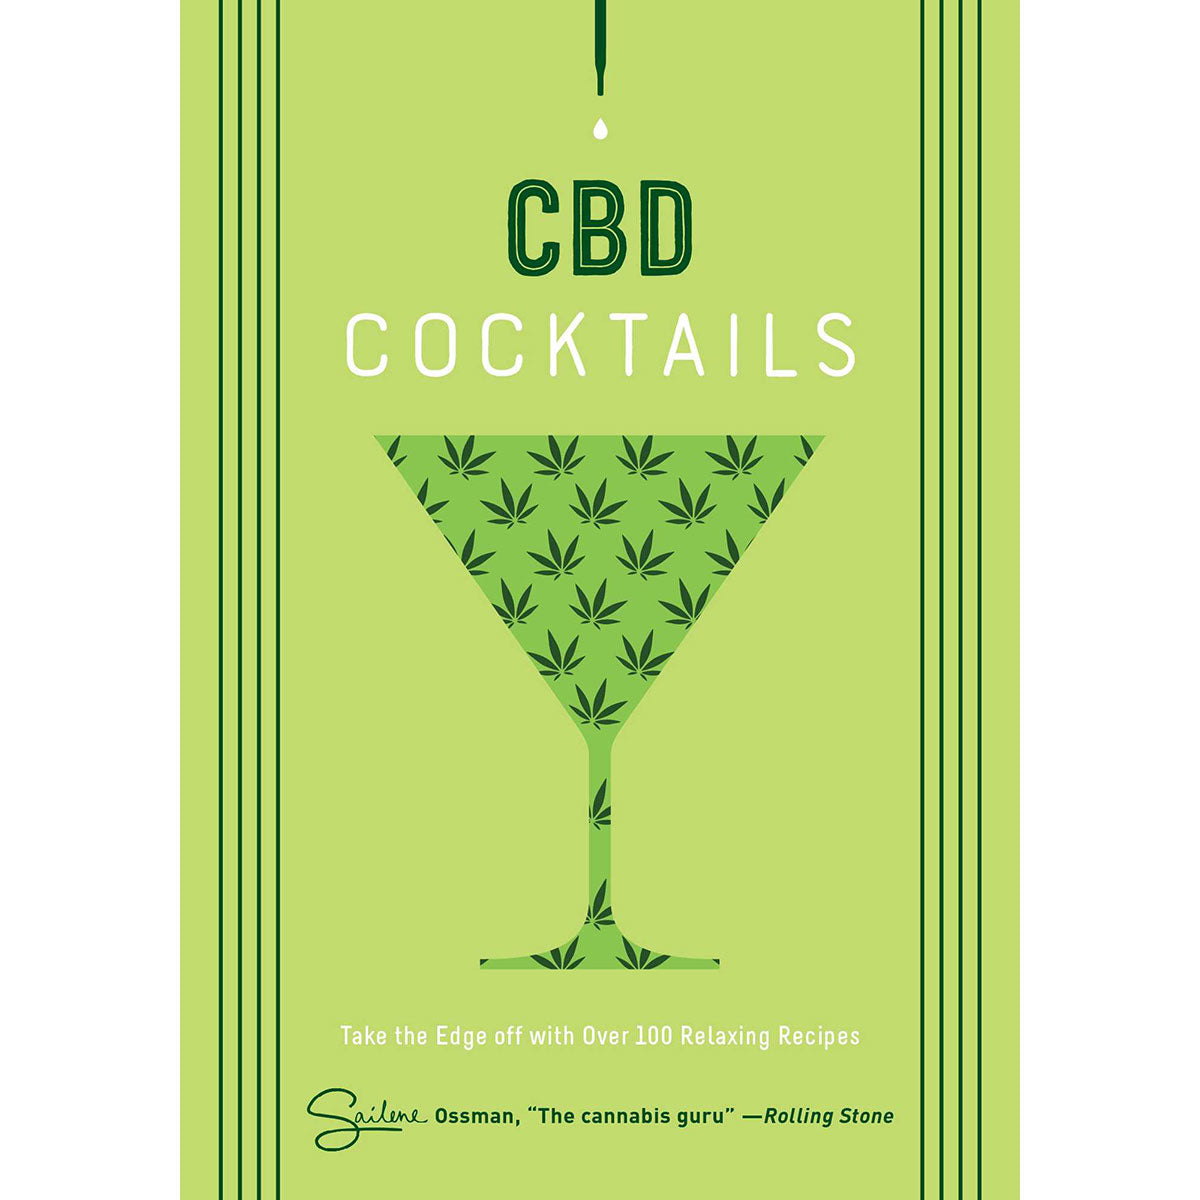 CBD Cocktails: Over 100 Recipes to Take the Edge Off